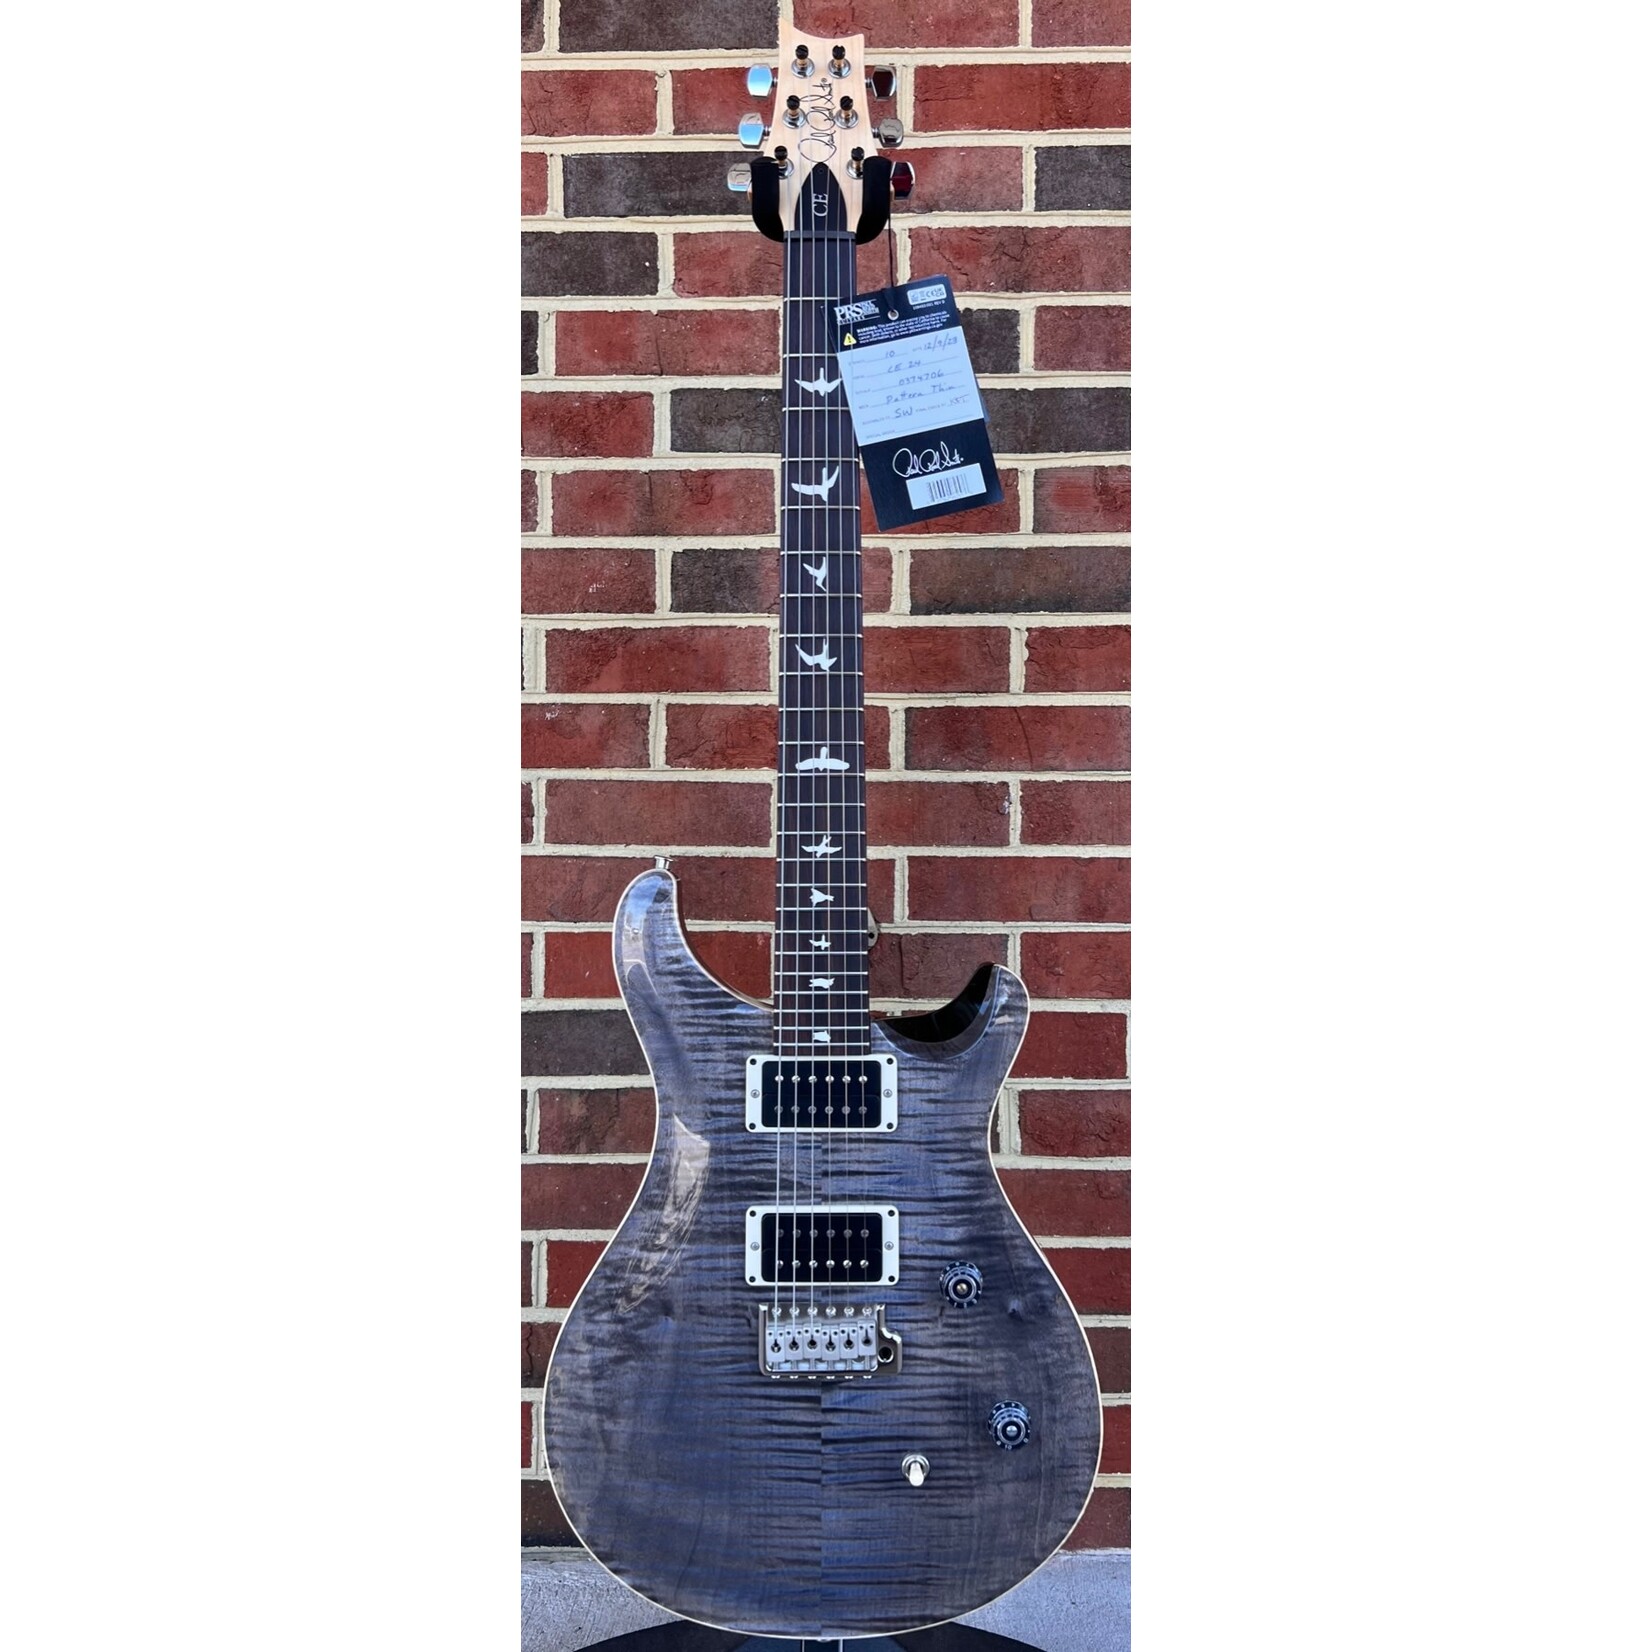 Paul Reed Smith Paul Reed Smith CE24, Faded Grey Black, Pattern Thin, 85/15 Pickups, Gig Bag